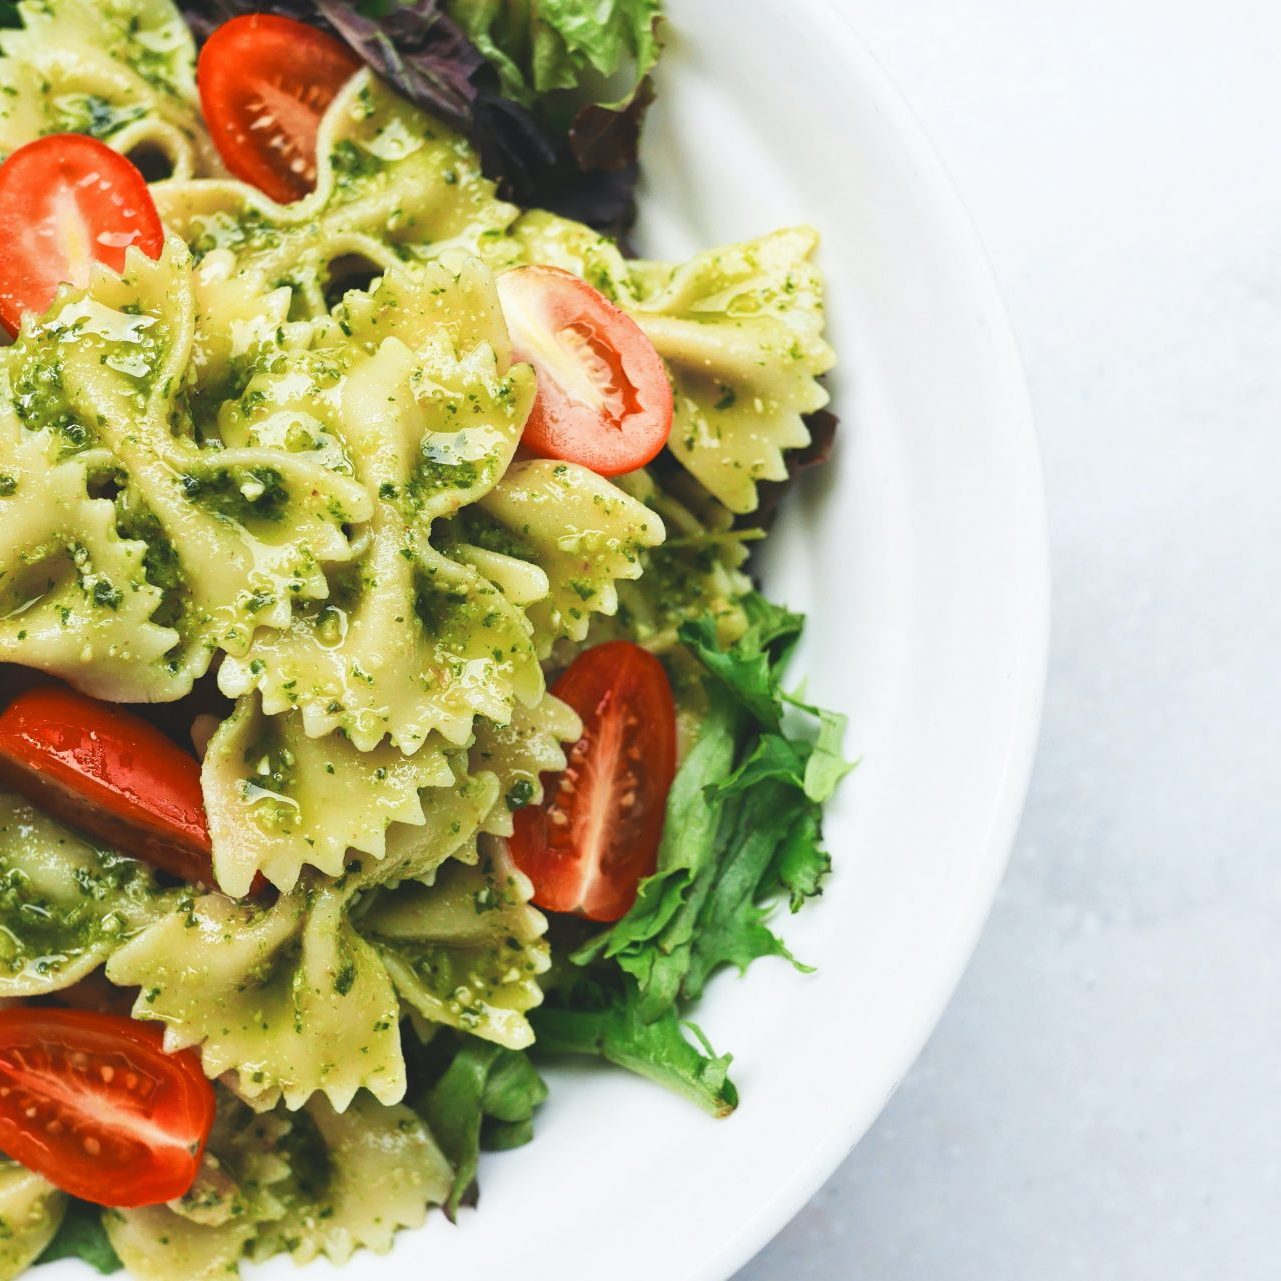 Farfalle with pesto, green salad and tomatoes in a white bowl on a light background